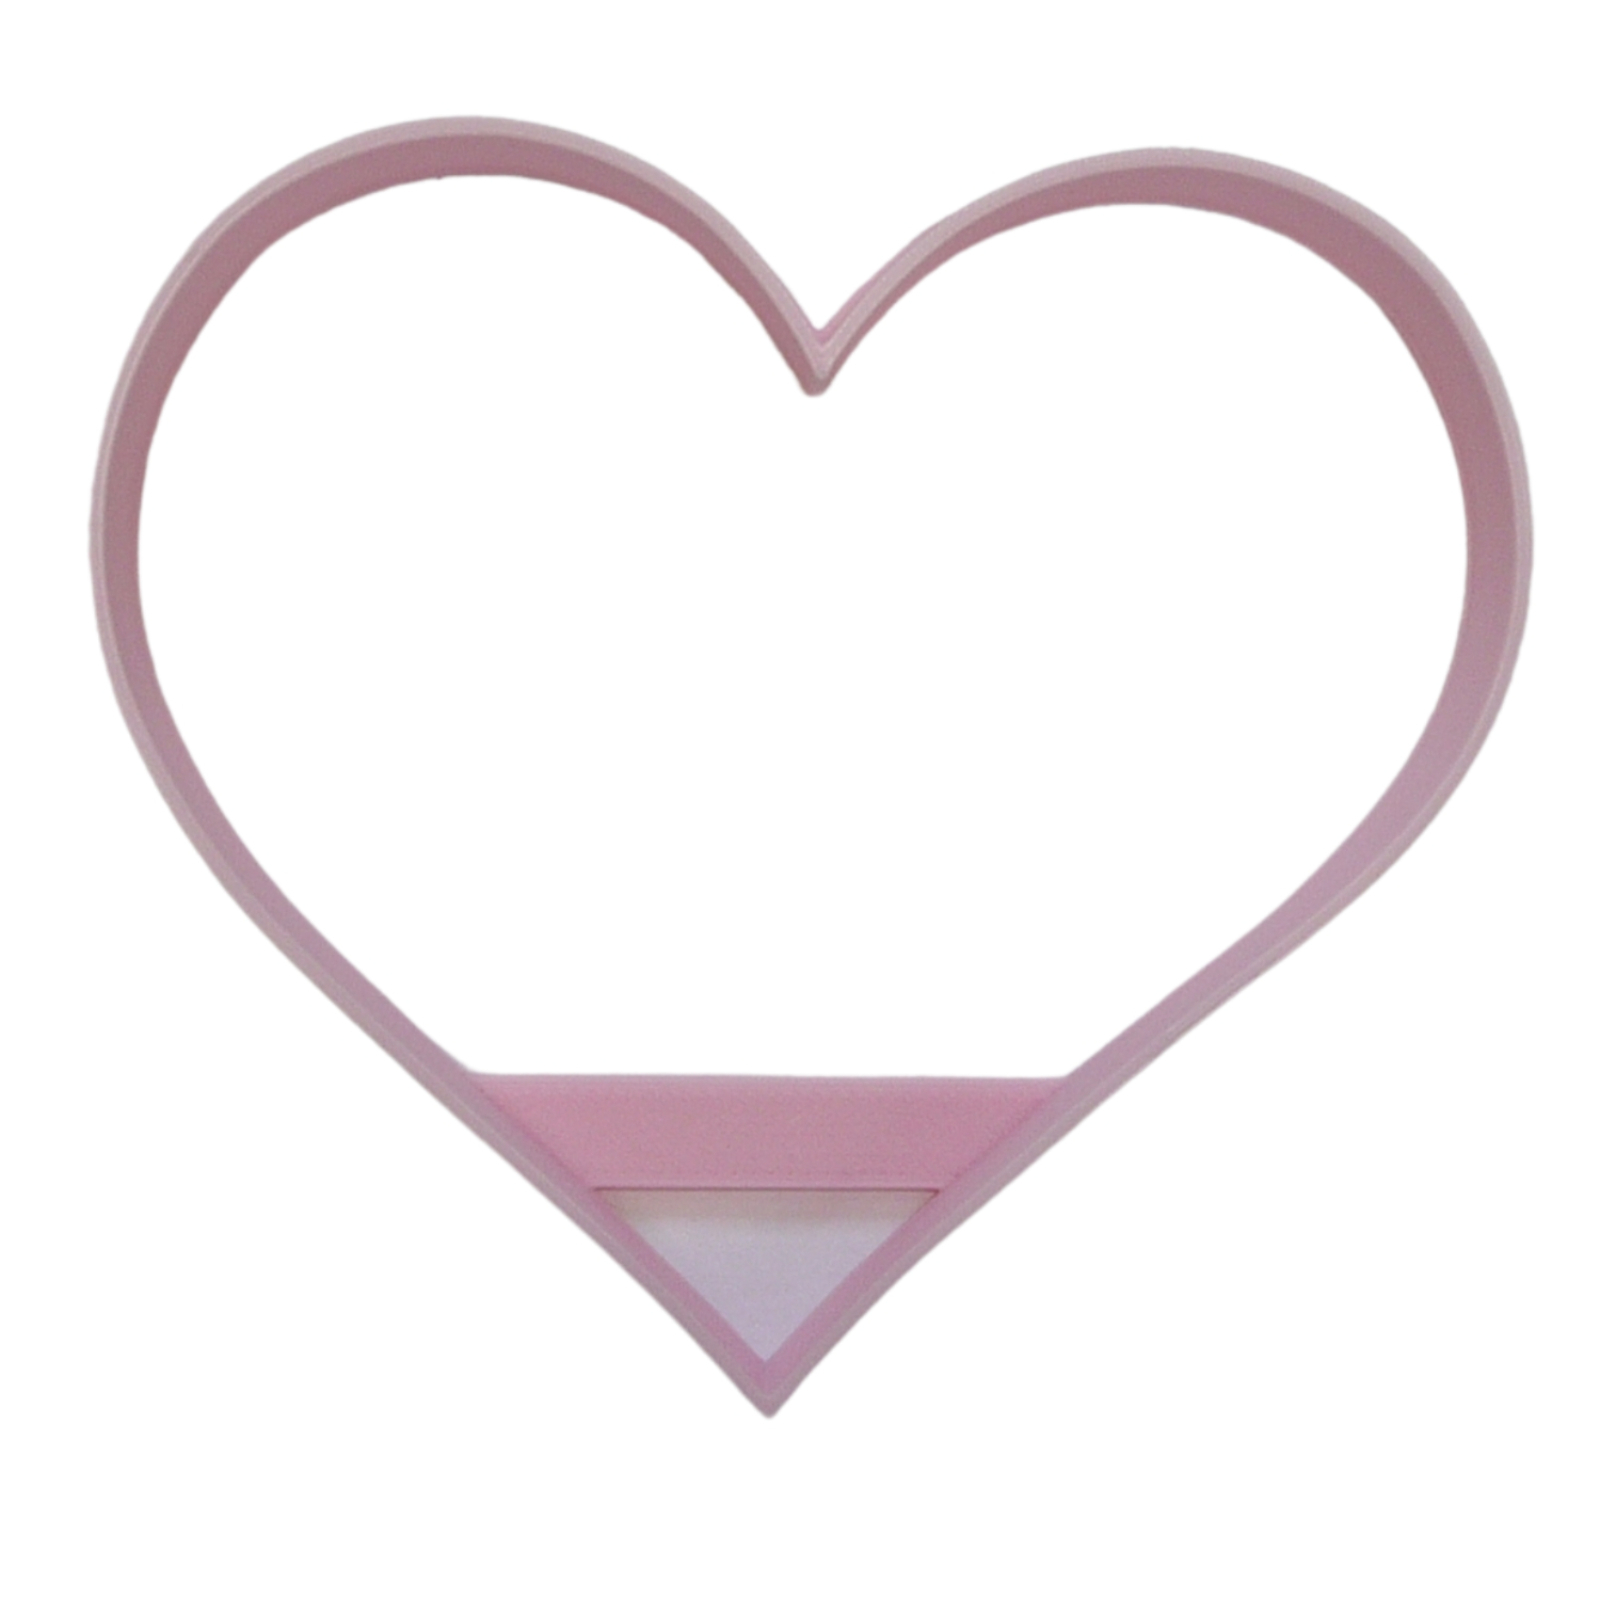 Primary image for 6x Heart Shape Fondant Cutter Cupcake Topper 1.75 IN USA FD5123